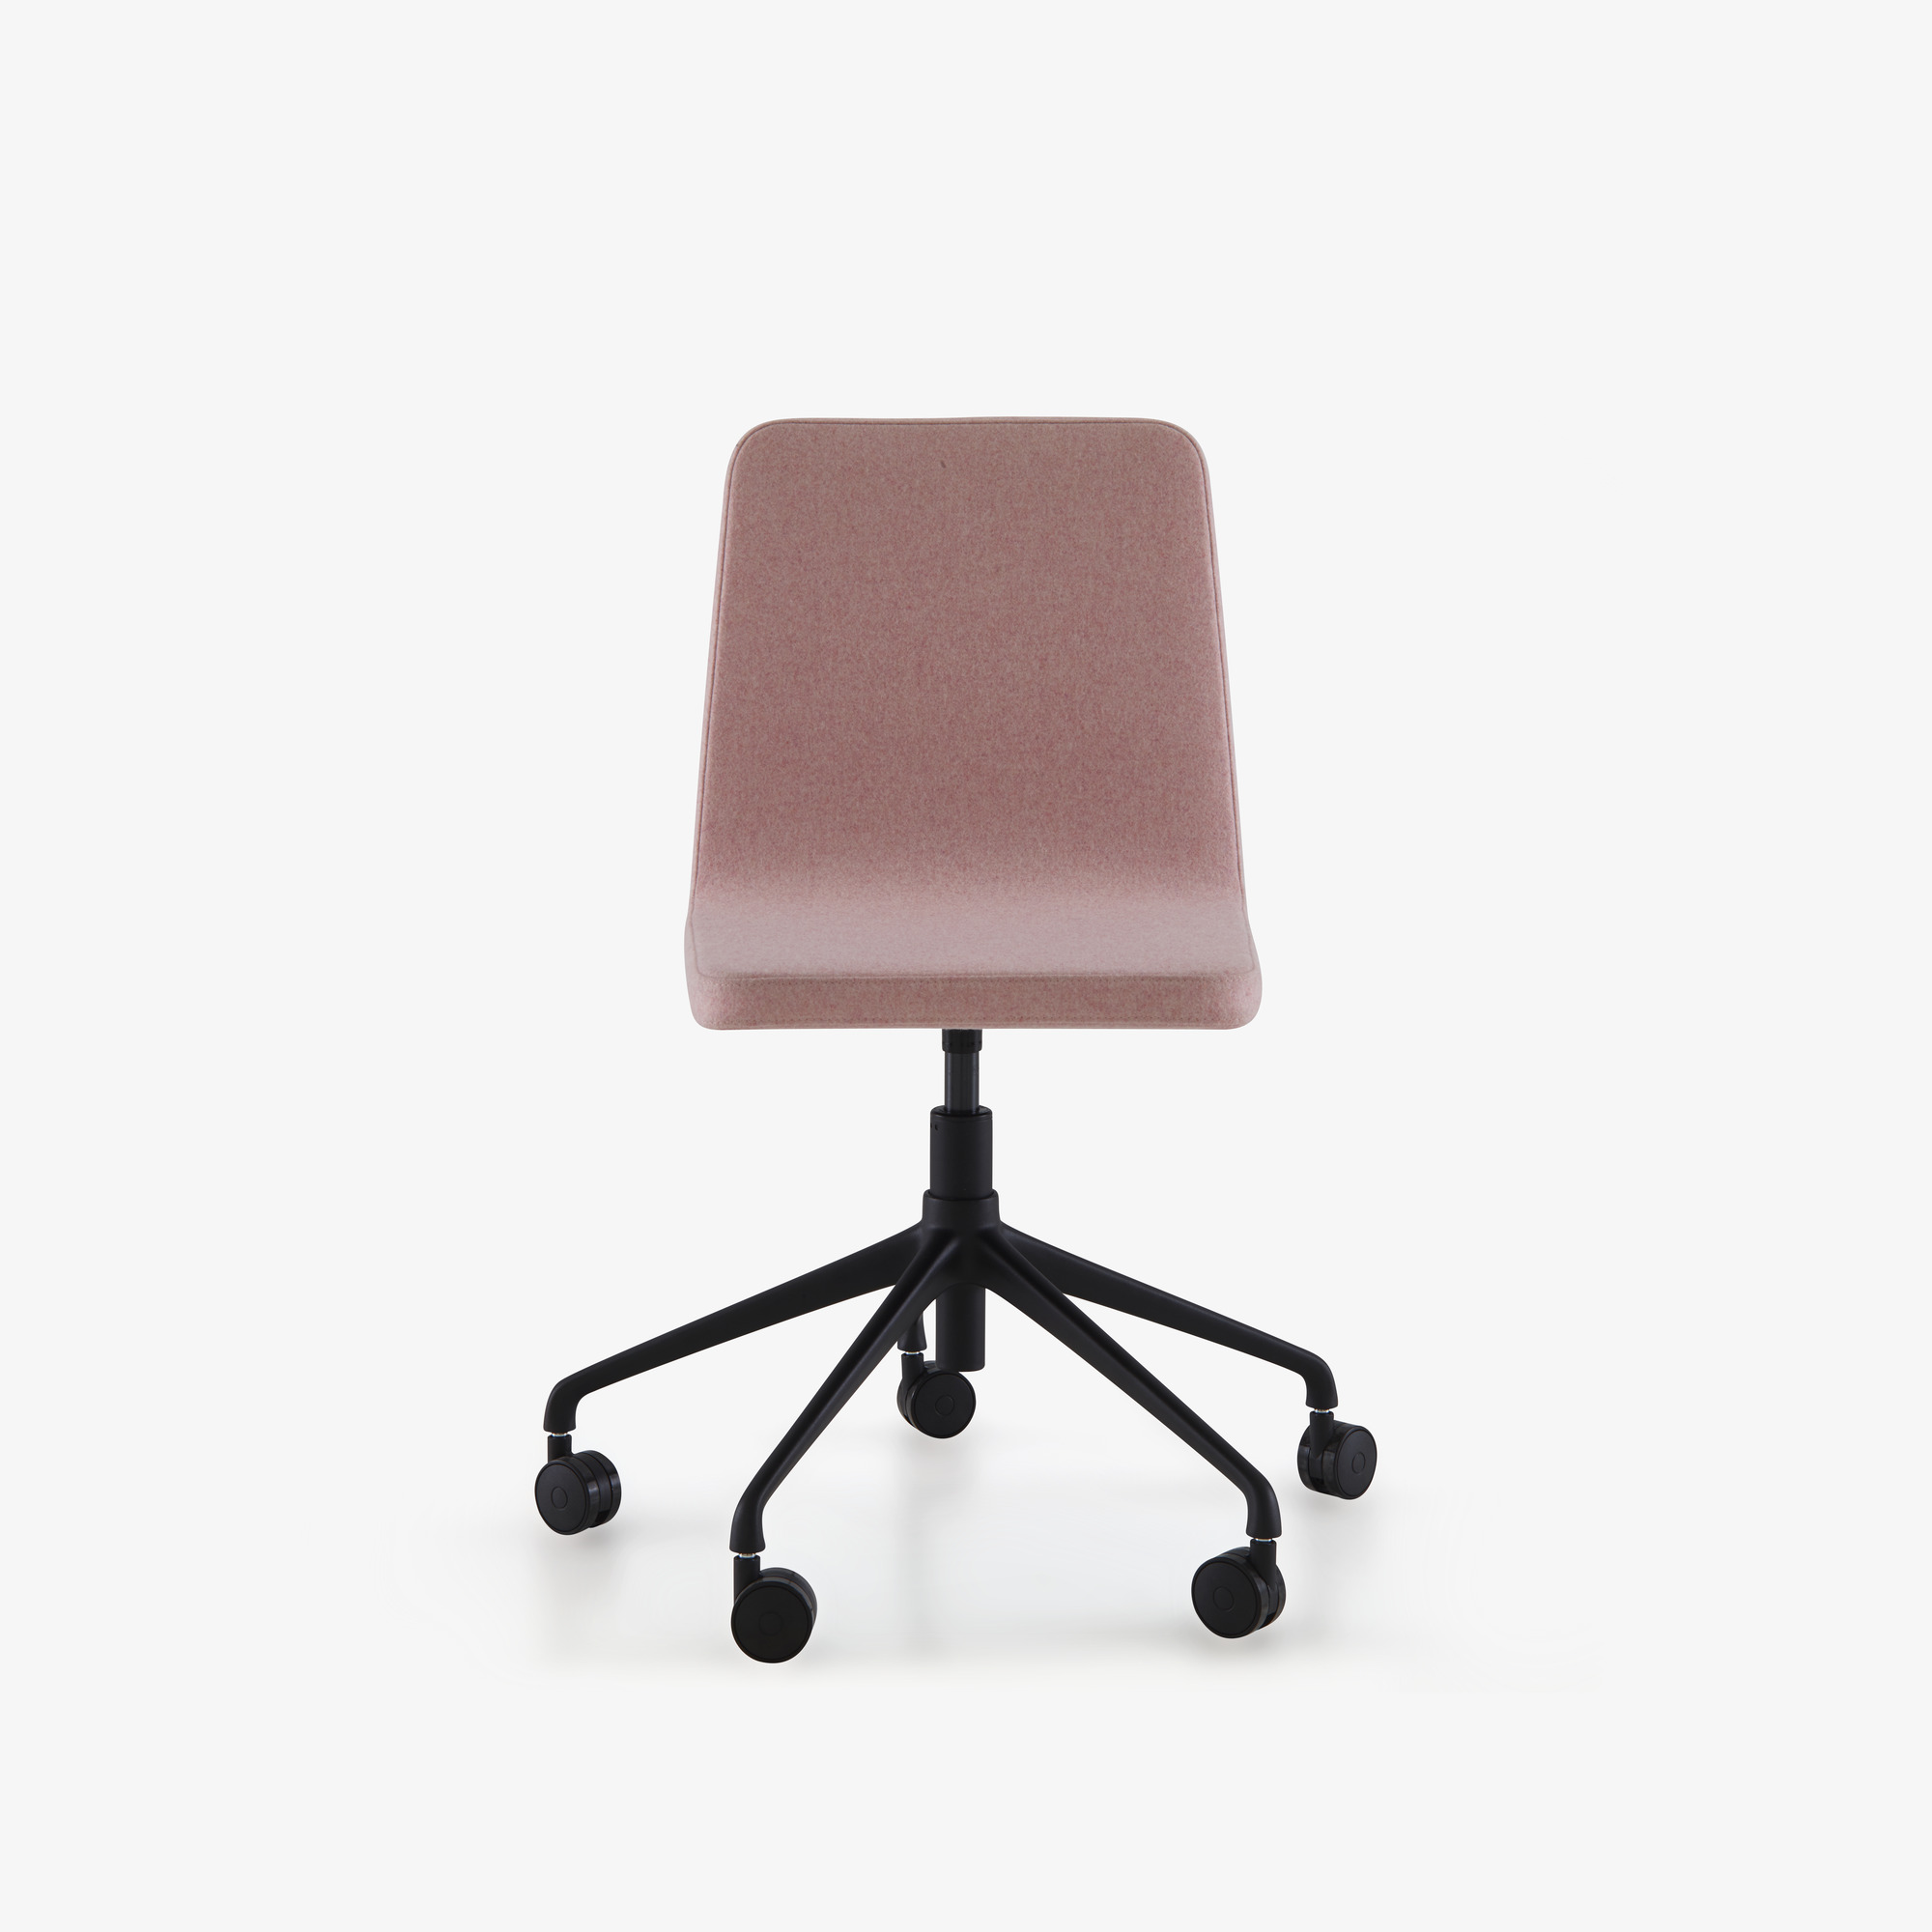 Image DESK CHAIR SET OF FEET WITH WHEELS